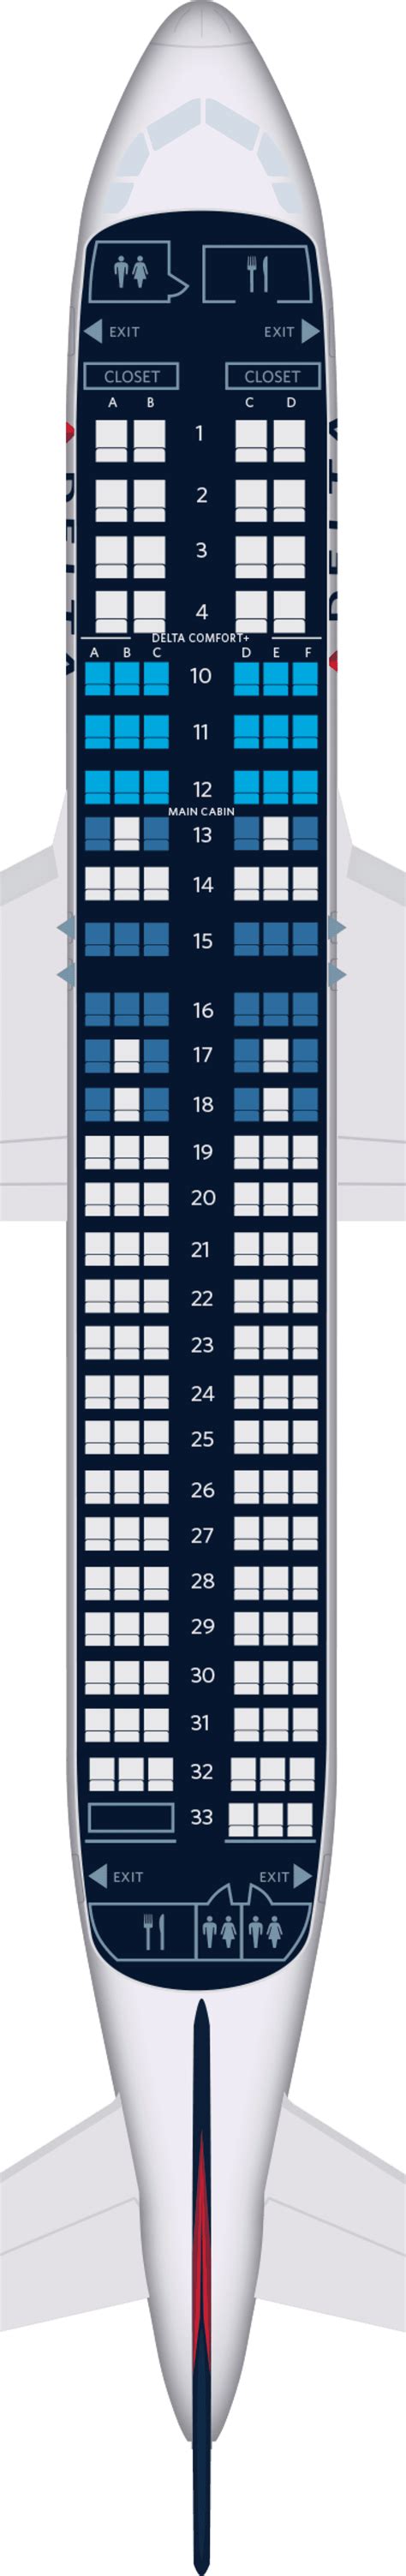 Delta airbus a320 seat map. Second cabin version of the Delta Airbus A320-200 (32K) (160 Seats) Seat map Delta Airlines Airbus A320-200 ver2. First class may accommodate 16 passengers in 4 rows that have 2-2 configuration. The seats of the 1st roware the best seats as they may have extra space for passengers legs. 18 seats of Delta Comfort+ class have 3-3 configuration. 